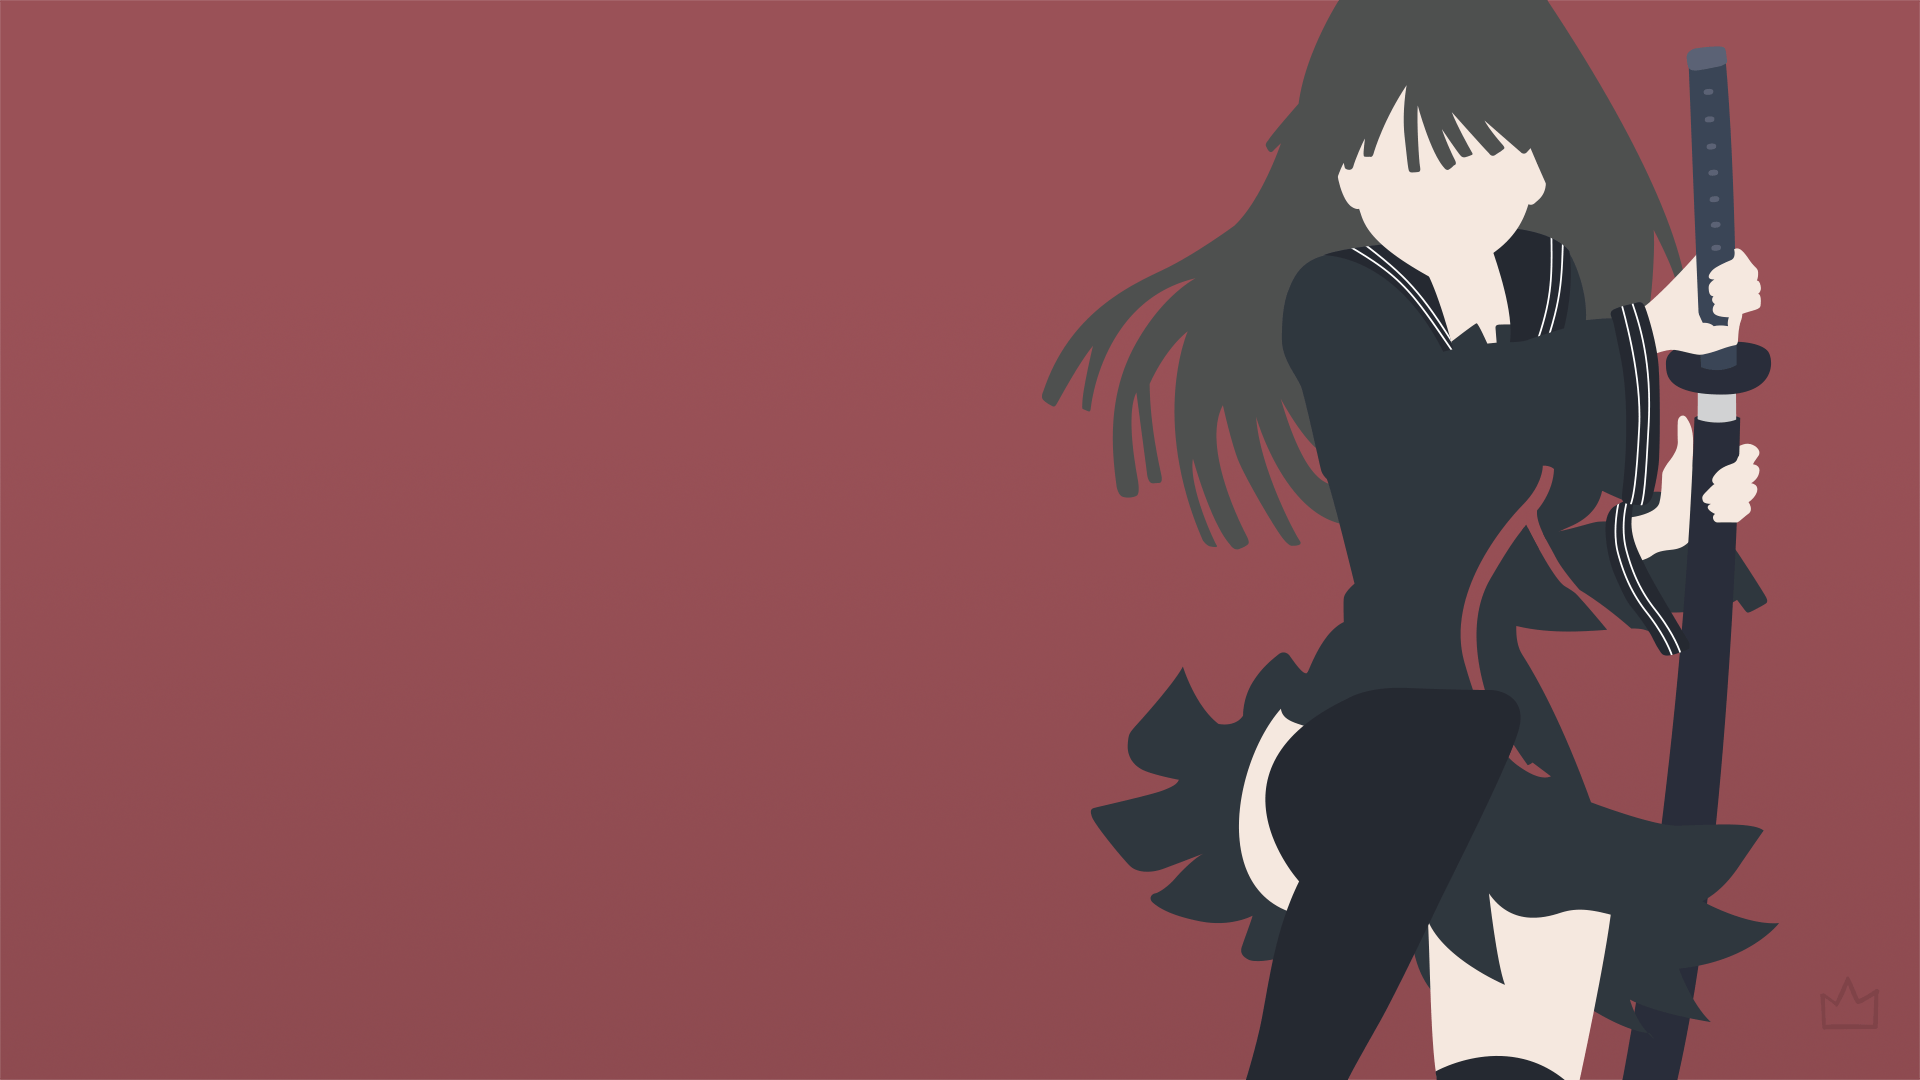 Minimalist Anime wallpaper  Apk Thing  Android Apps Free Download  Anime  background Anime wallpaper Aesthetic anime